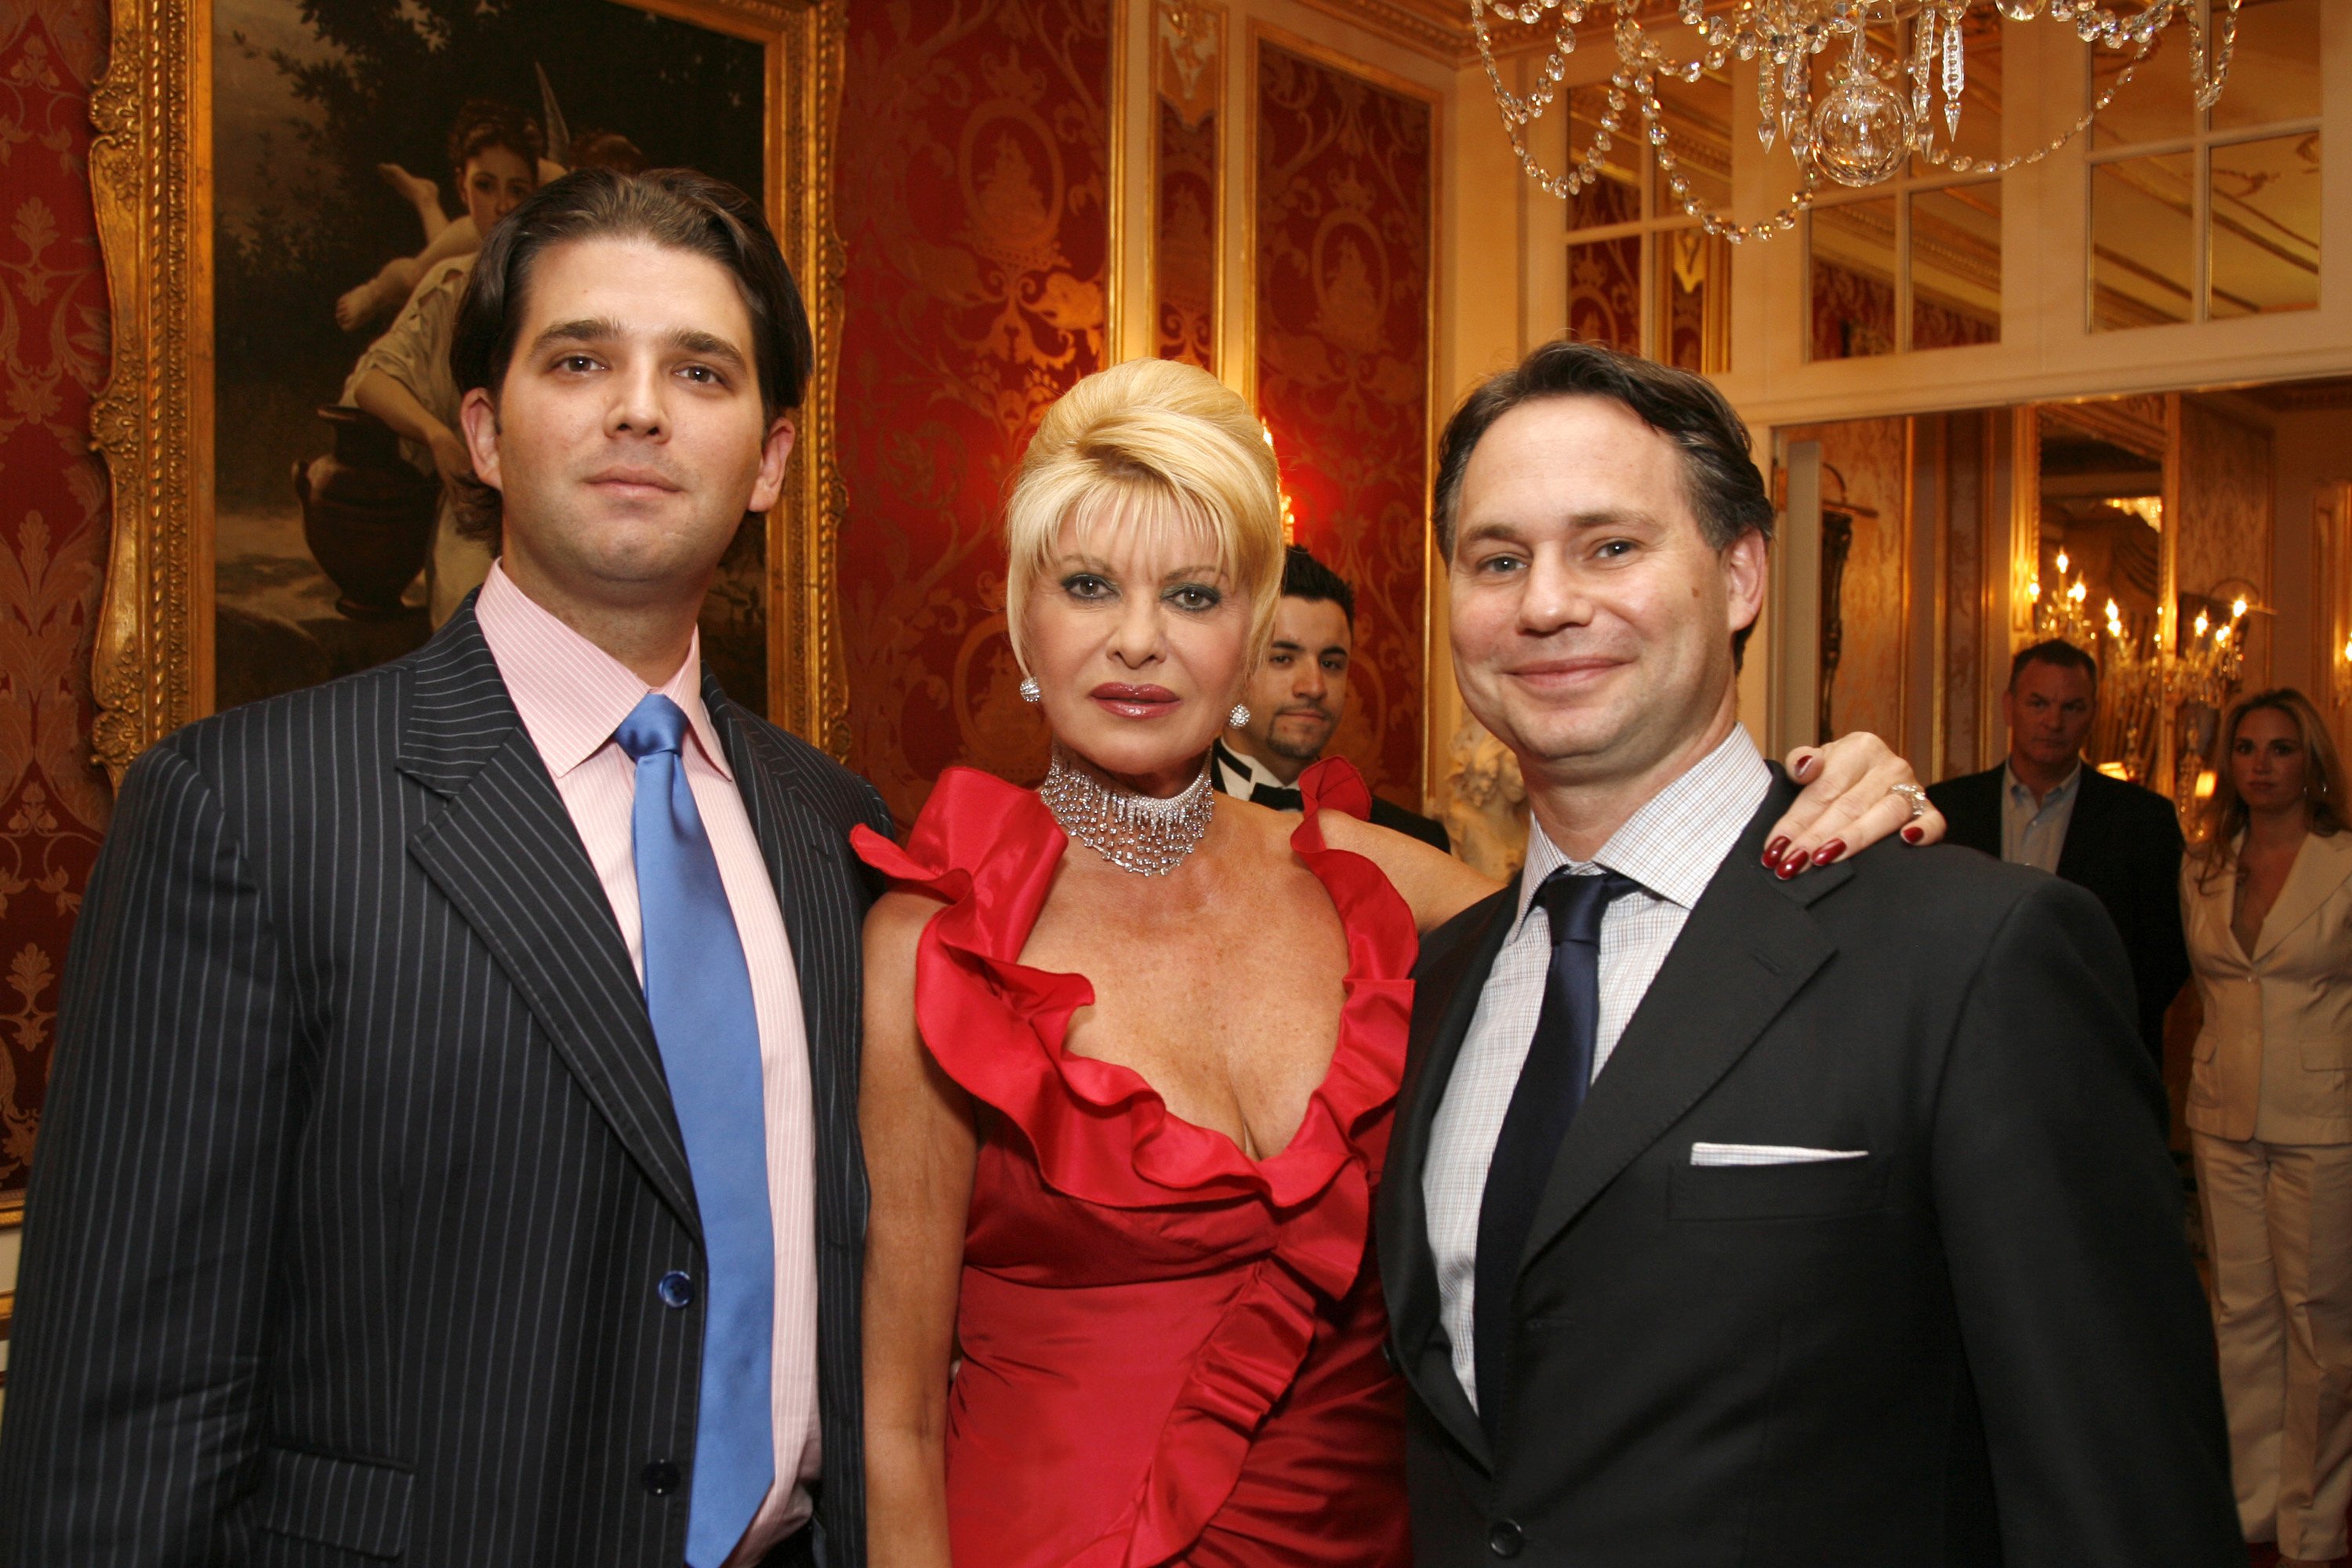 Donald Trump Jr., Ivana Trump and Jason Binn during Haley Binn, Jason Binn and Ivana Trump Spring into Summer with a Private Cocktail Reception at Ivana Trump Residence in New York City, New York, United States. | Source: Getty Images